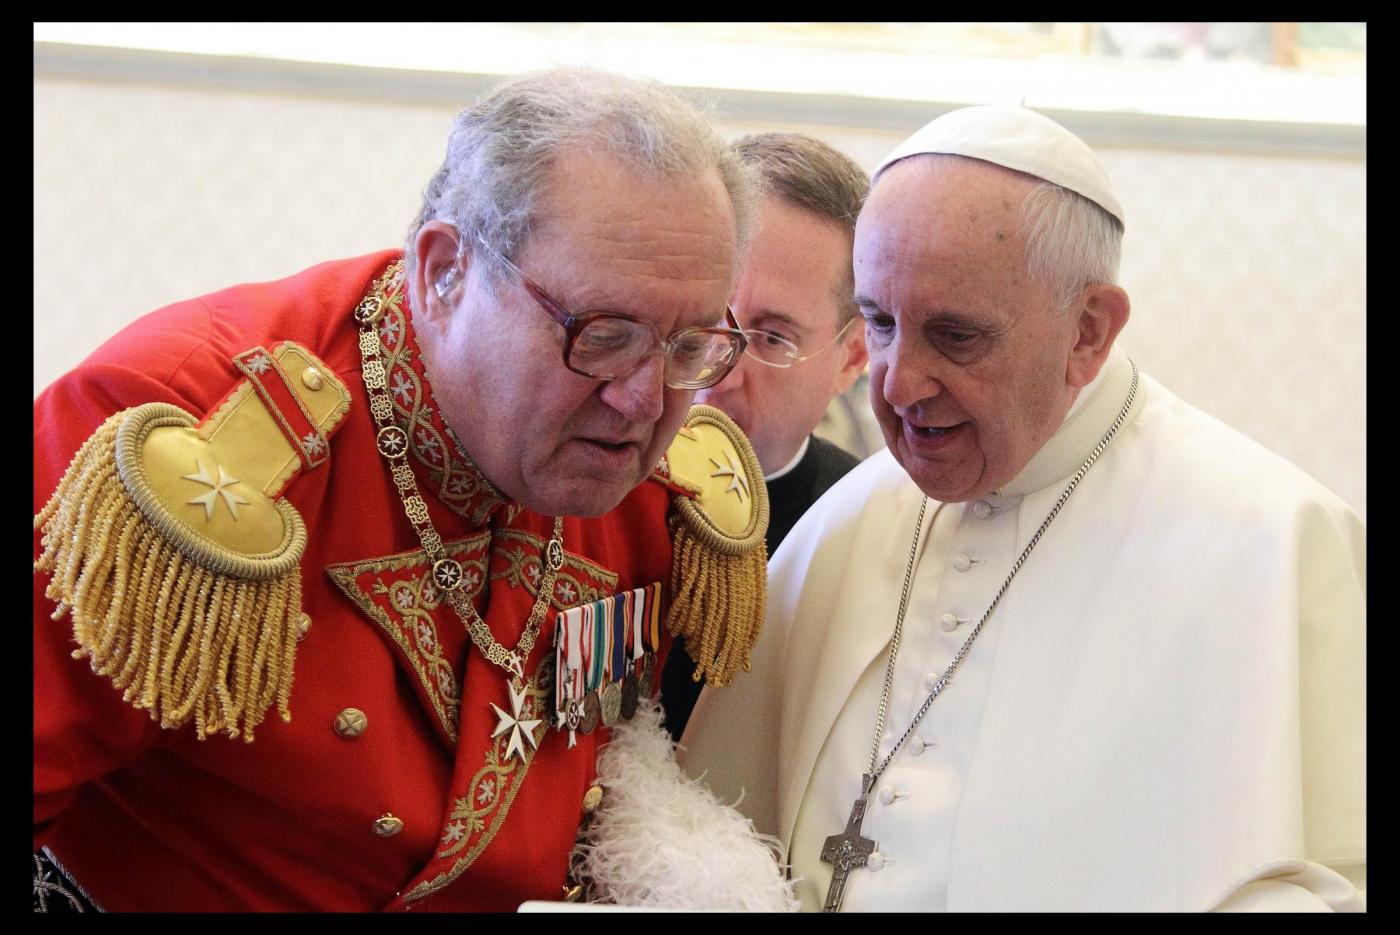 Pope Meets Grand Master of the Order of Malta